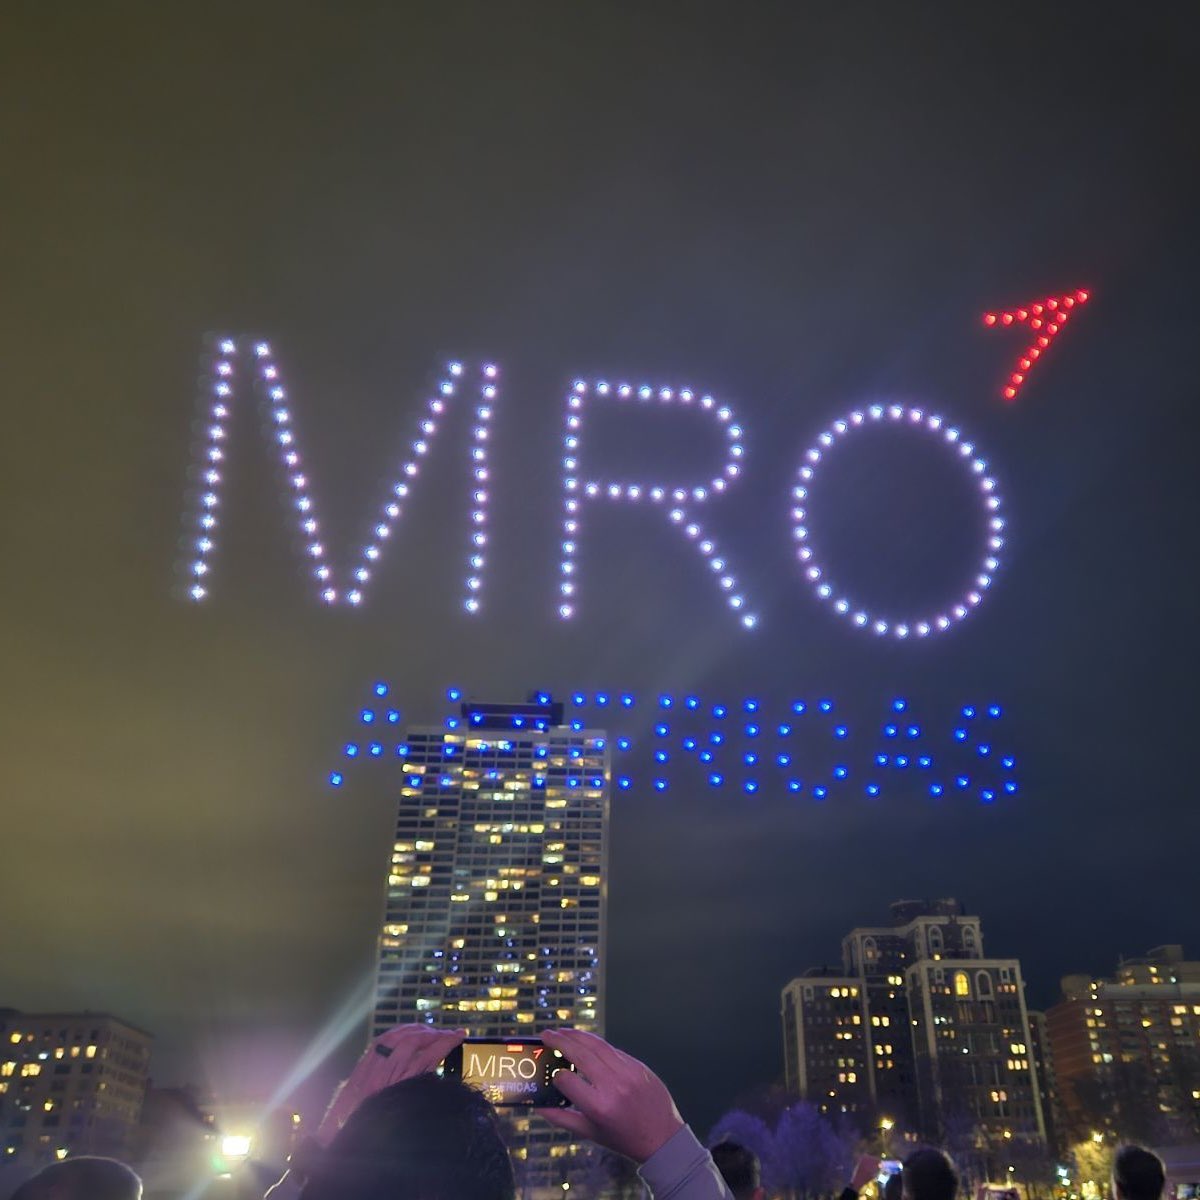 Filled with good food, great conversations, and even a solar eclipse — our week at MRO Americas in Chicago was nothing short of awesome! A huge thank you to everyone who took the time to connect with us. If we missed you, don't hesitate to reach out at sales@latitude-aero.com.…